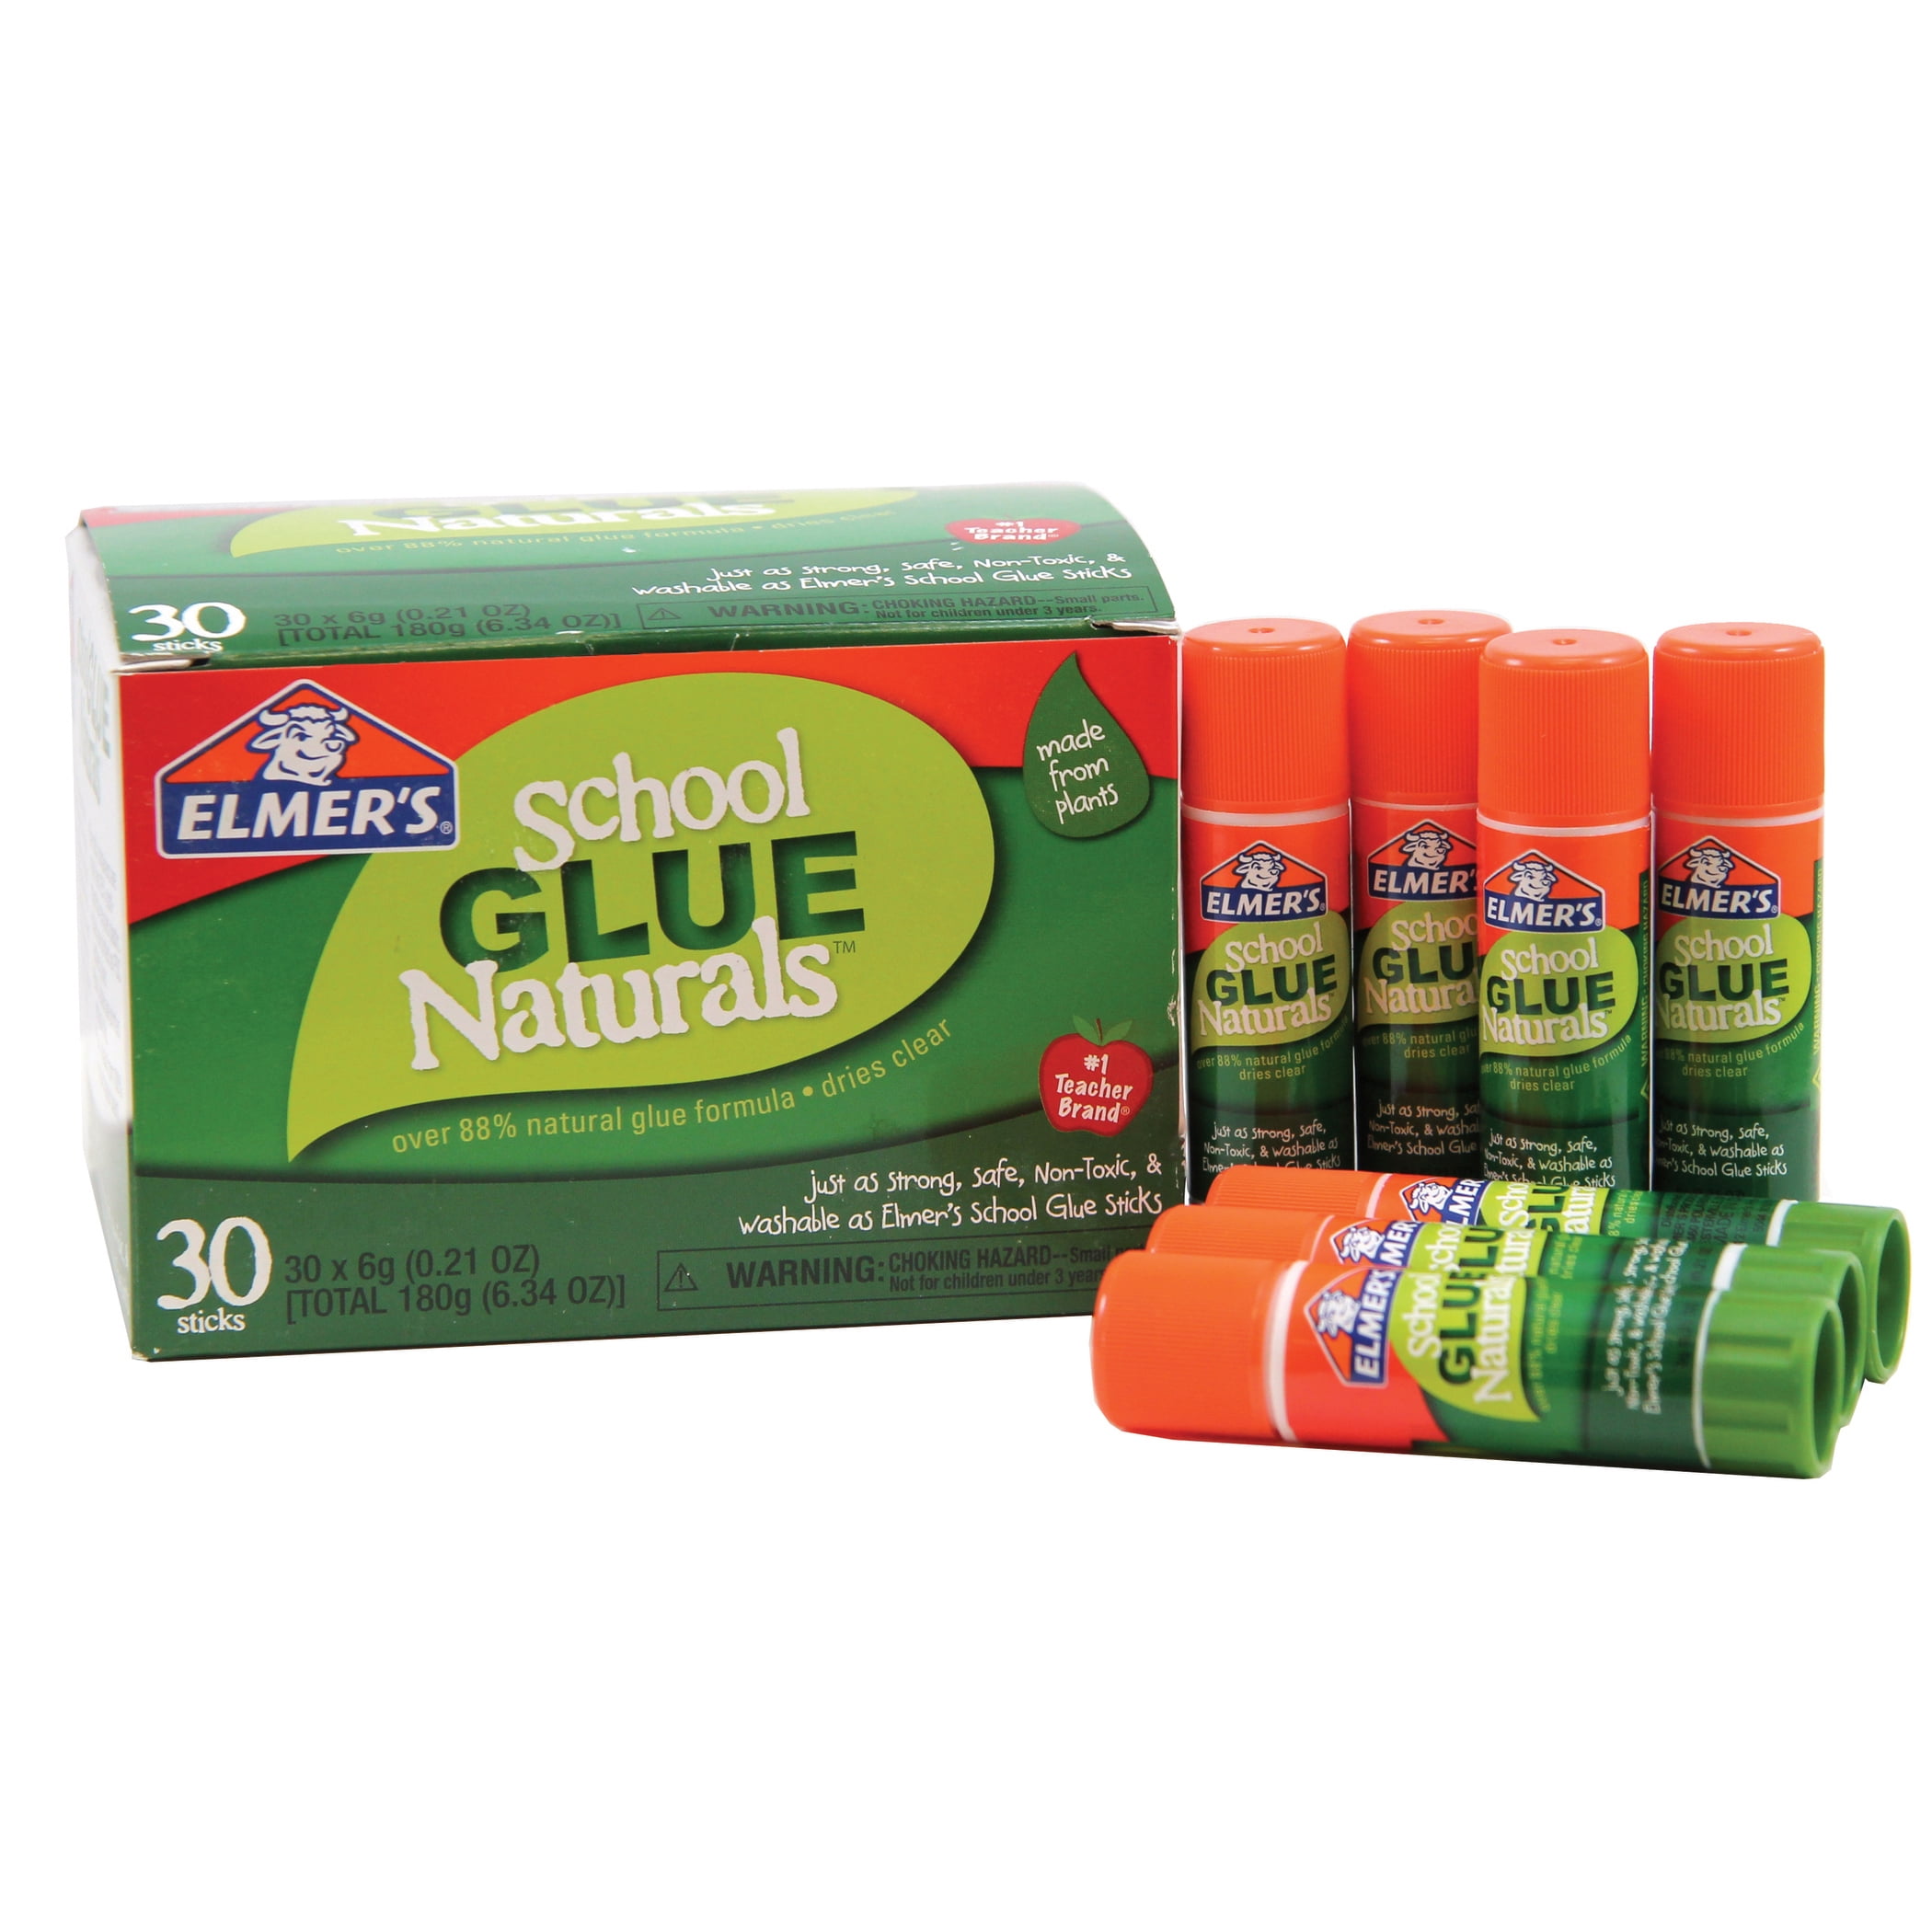 Elmer's introduces school glue made from natural ingredients